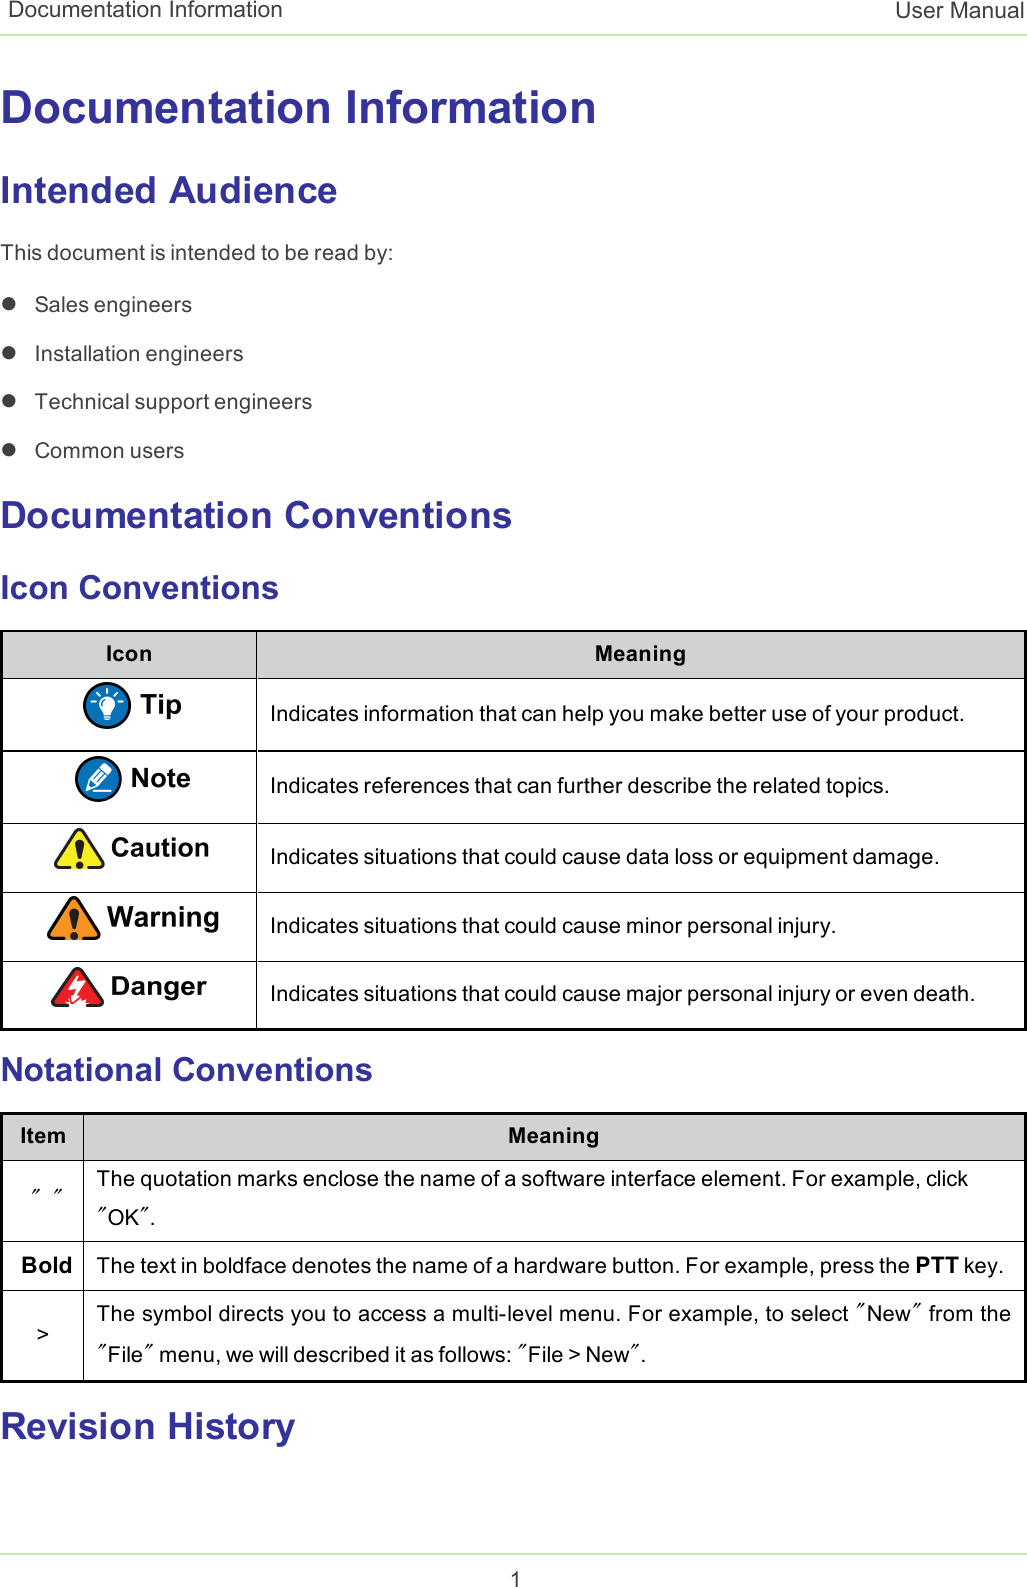 Documentation InformationIntended AudienceThis document is intended to be read by:lSales engineerslInstallation engineerslTechnical support engineerslCommon usersDocumentation ConventionsIcon ConventionsIcon MeaningIndicates information that can help you make better use of your product.Indicates references that can further describe the related topics.Indicates situations that could cause data loss or equipment damage.Indicates situations that could cause minor personal injury.Indicates situations that could cause major personal injury or even death.Notational ConventionsItem Meaning&quot; &quot; The quotation marks enclose the name of a software interface element. For example, click&quot;OK&quot;.Bold The text in boldface denotes the name of a hardware button. For example, press the PTT key.&gt;The symbol directs you to access a multi-level menu. For example, to select &quot;New&quot;from the&quot;File&quot;menu, we will described it as follows: &quot;File &gt; New&quot;.Revision History1Documentation Information User Manual